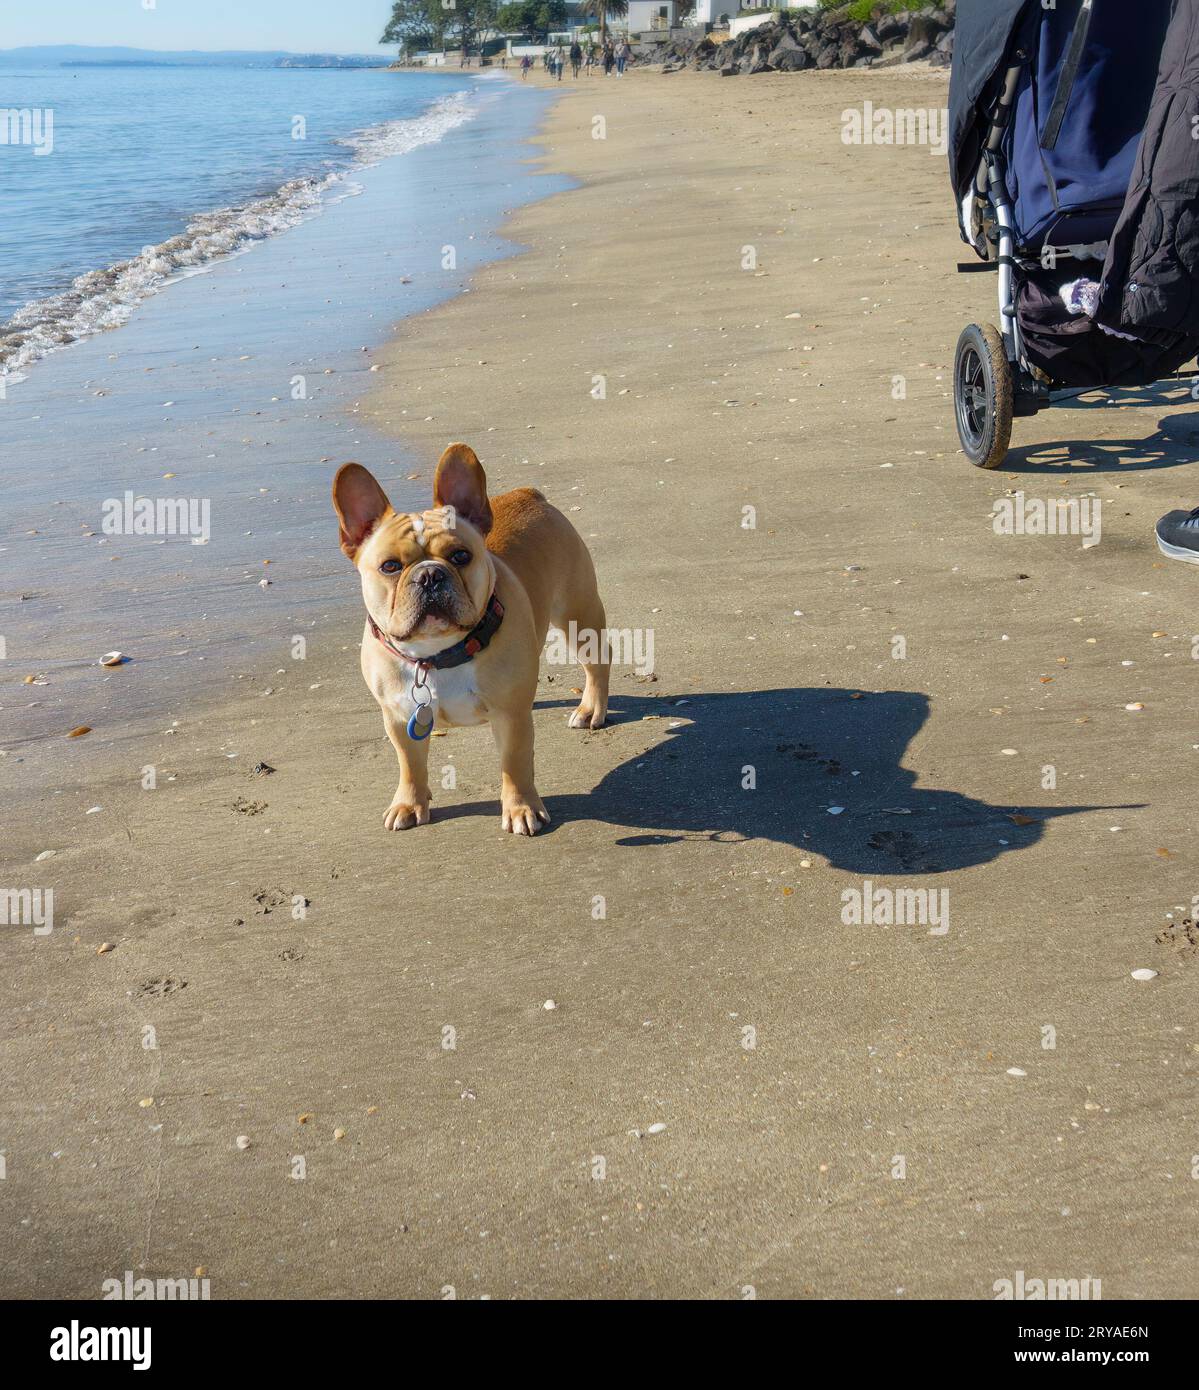 A small dog looking up at the camera. A baby pram and unrecognizable people walking on the beach. Vertical format. Stock Photo